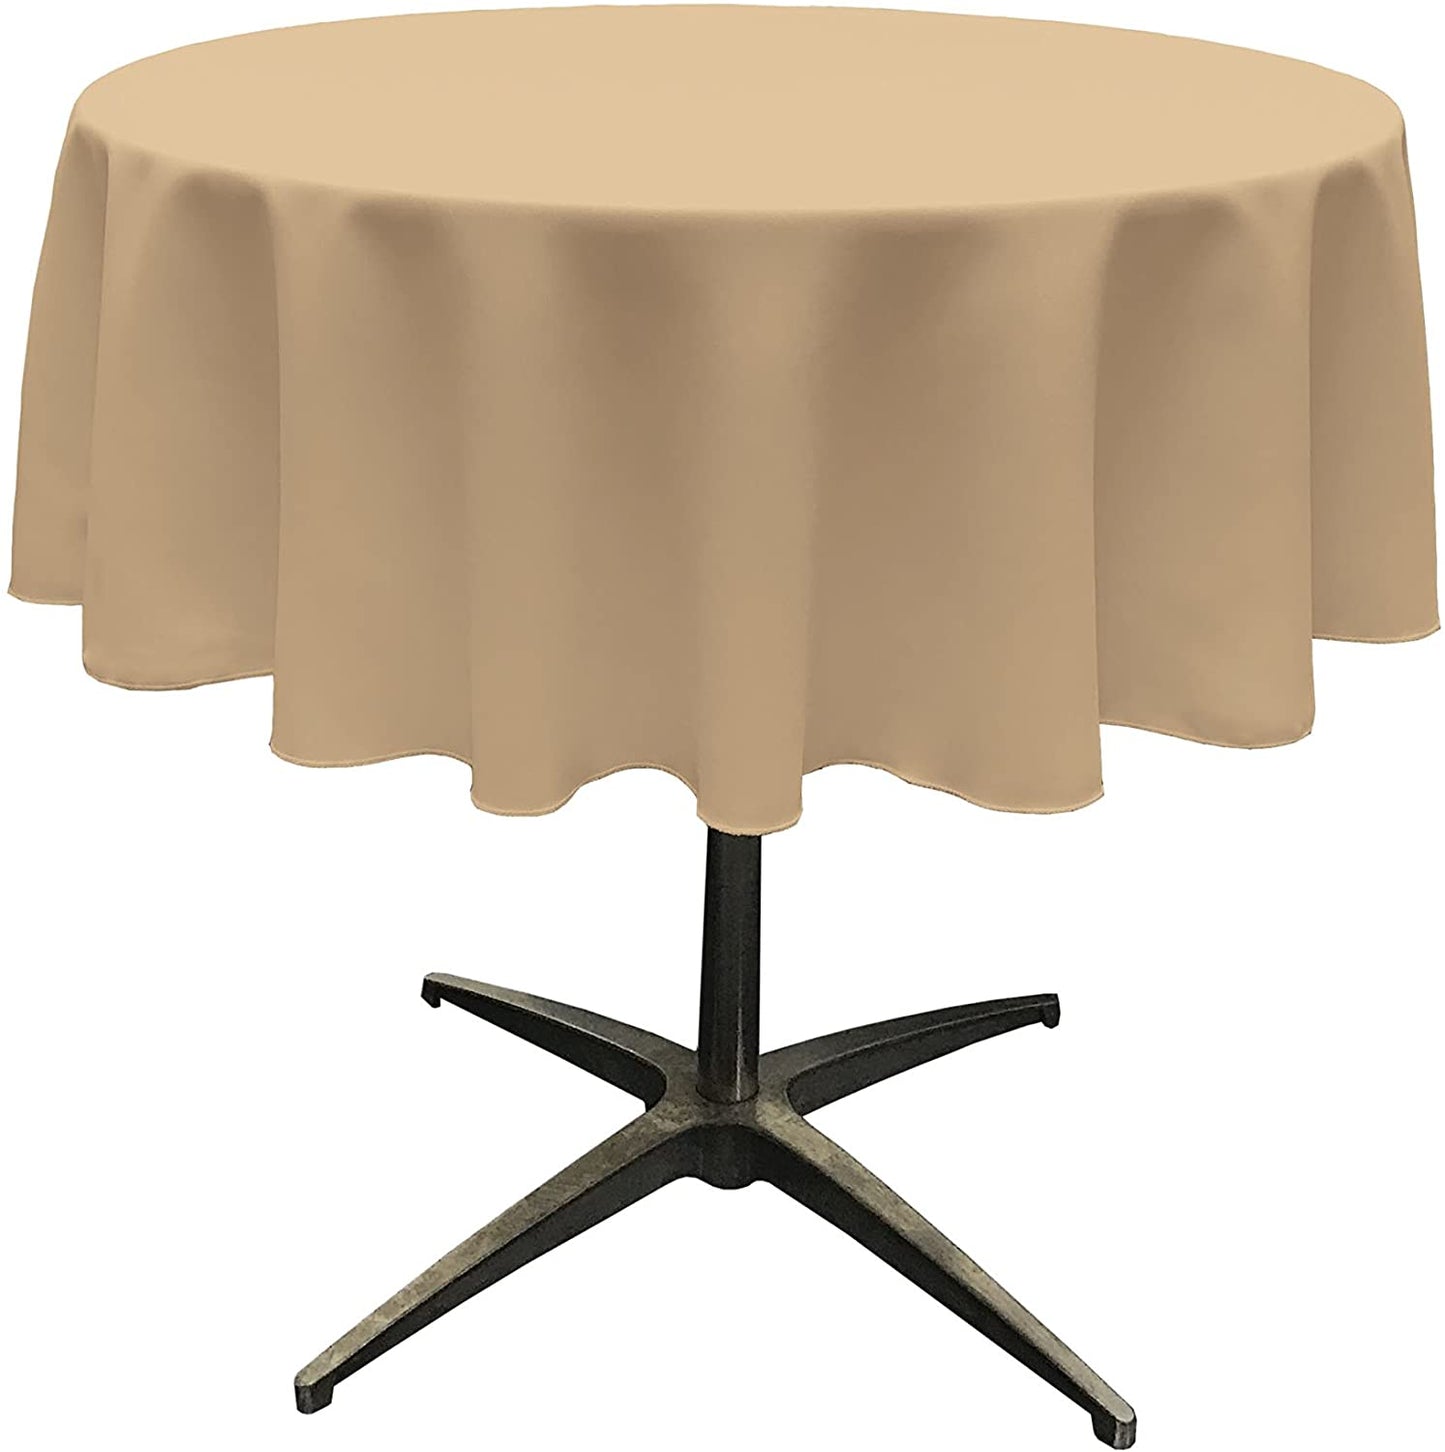 Polyester Poplin Washable Round Tablecloth, Stain and Wrinkle Resistant Table Cover Khaki